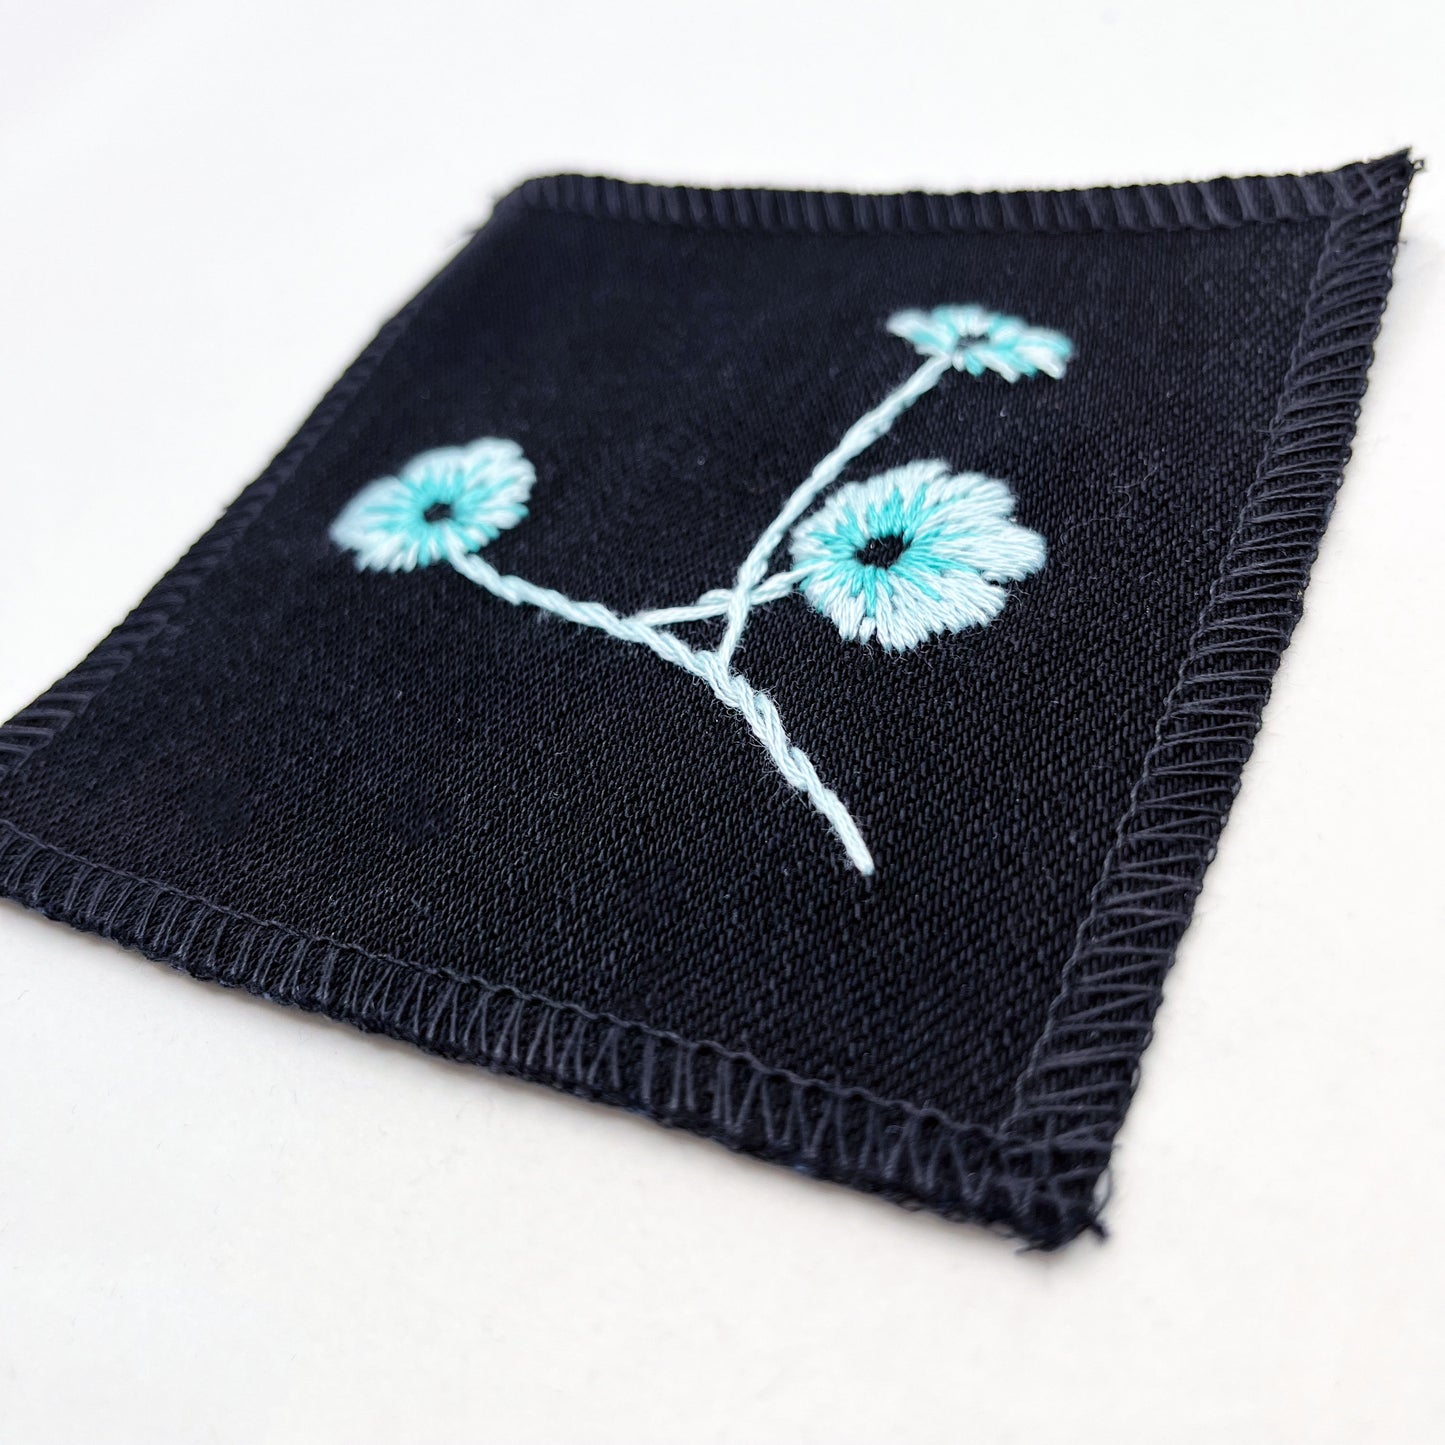 a close up angled view of a black colored square patch, hand embroidered with three poppies on a stem, in shades of blue, with overlocked edges, on a white background